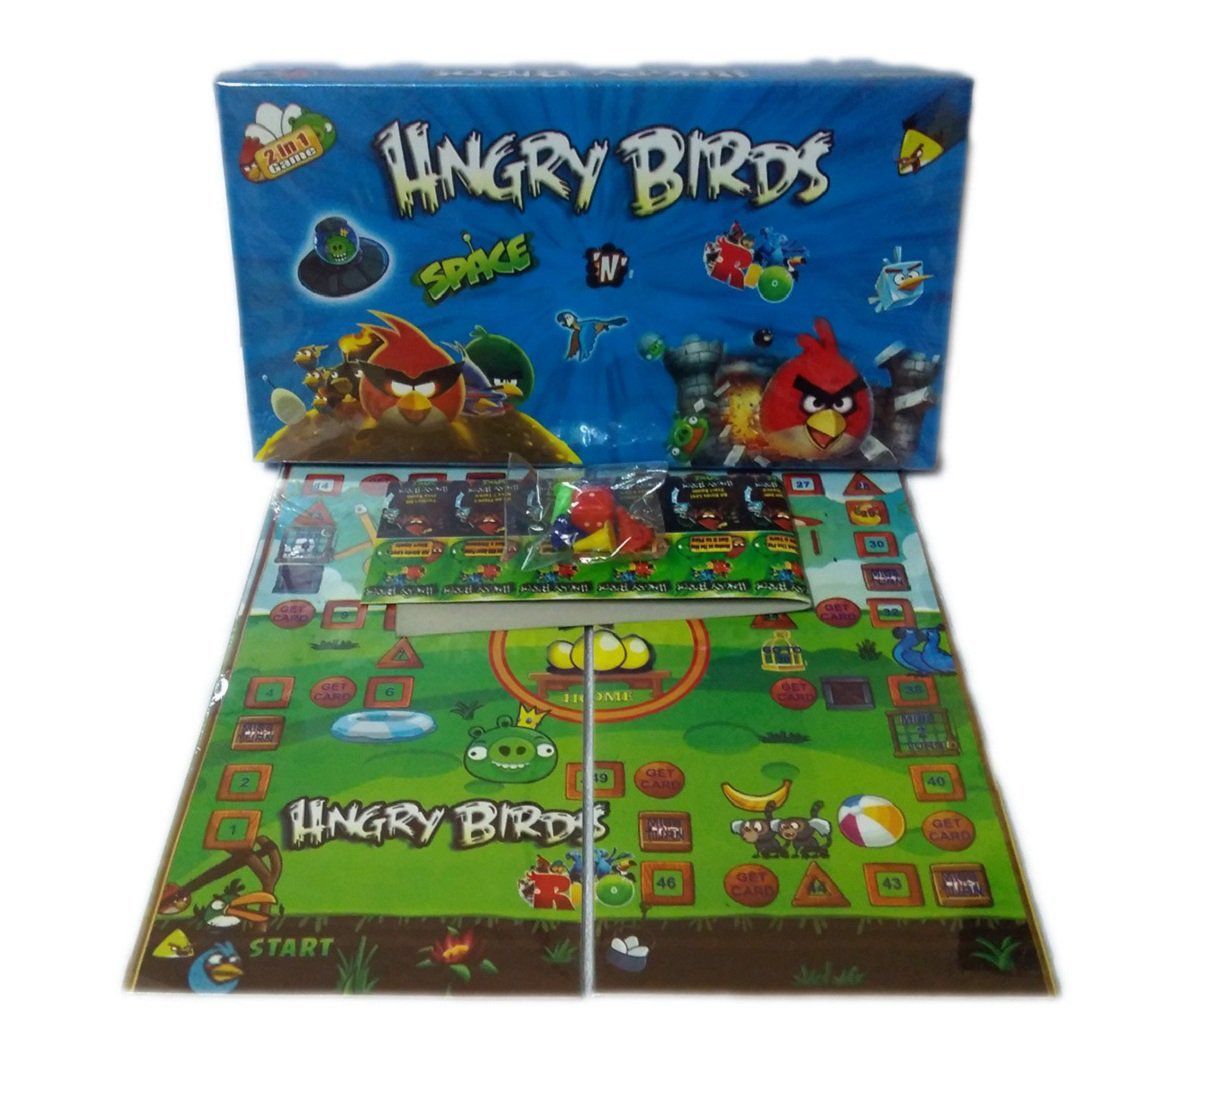 angry birds space board game